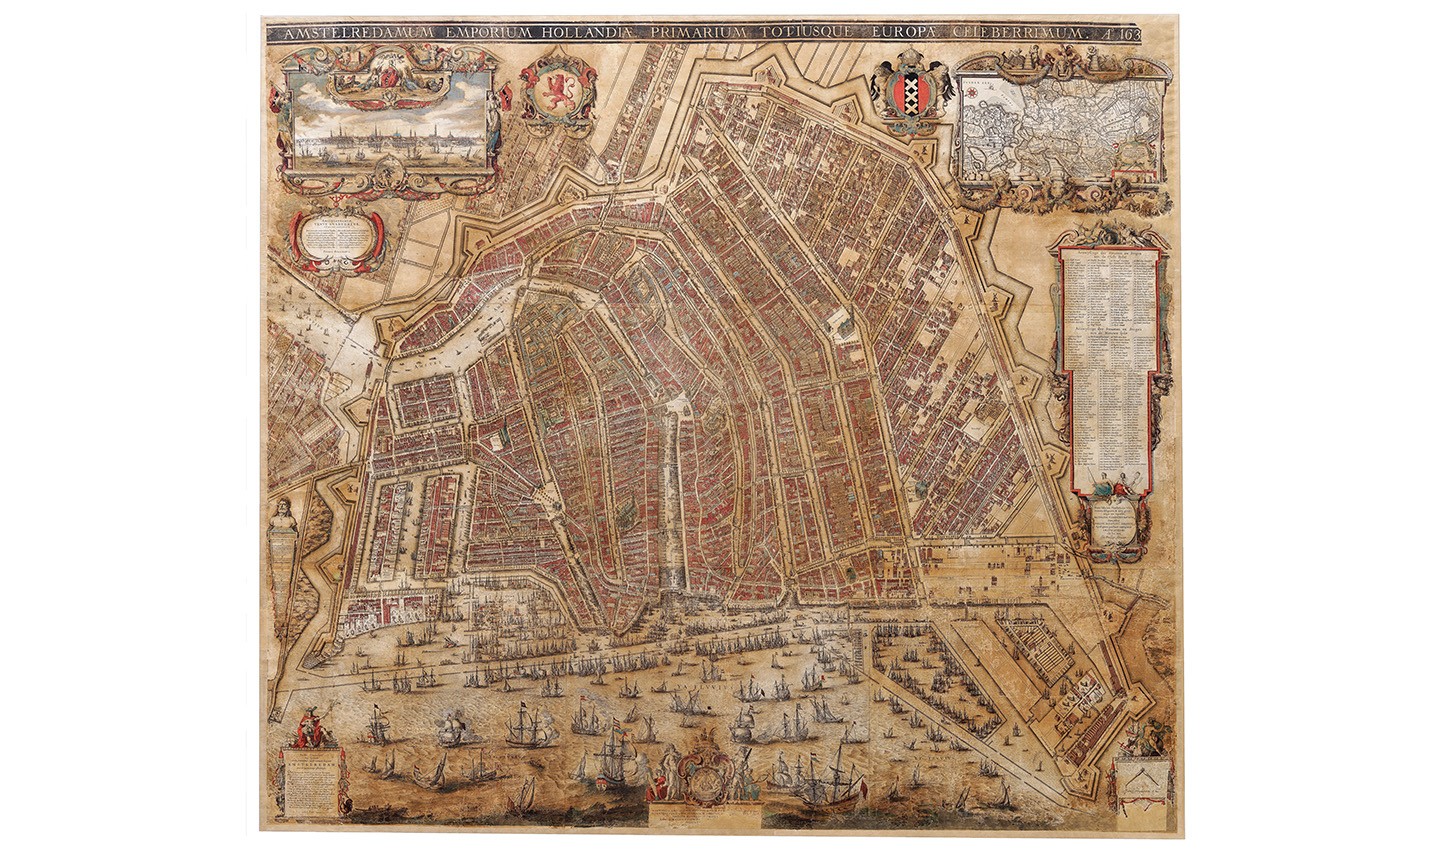 Old map of Amsterdam